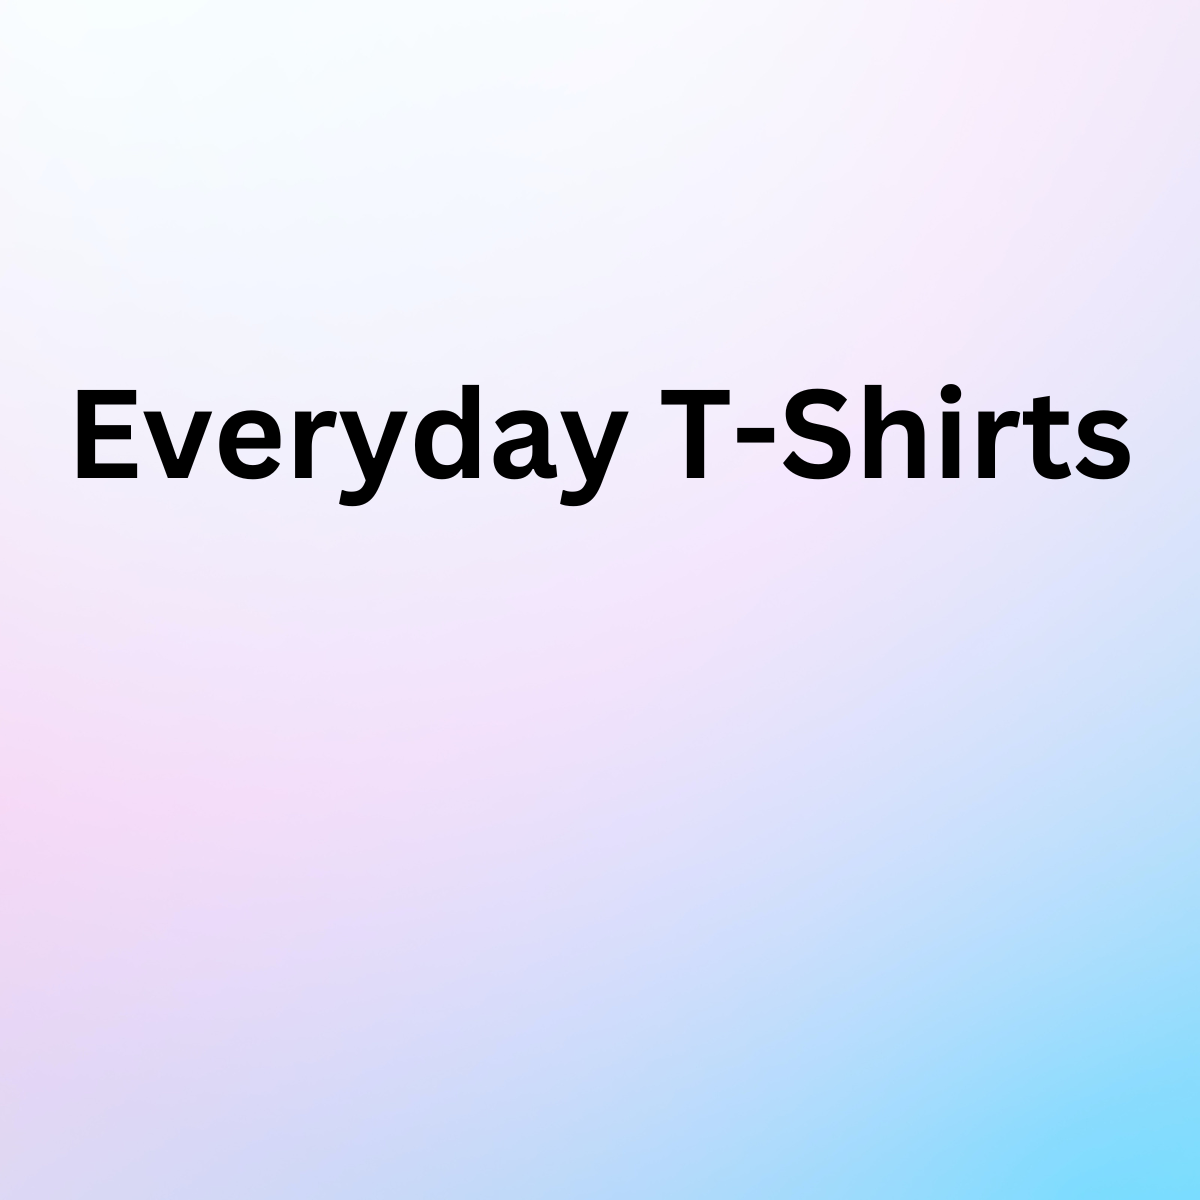 Everyday T-Shirts